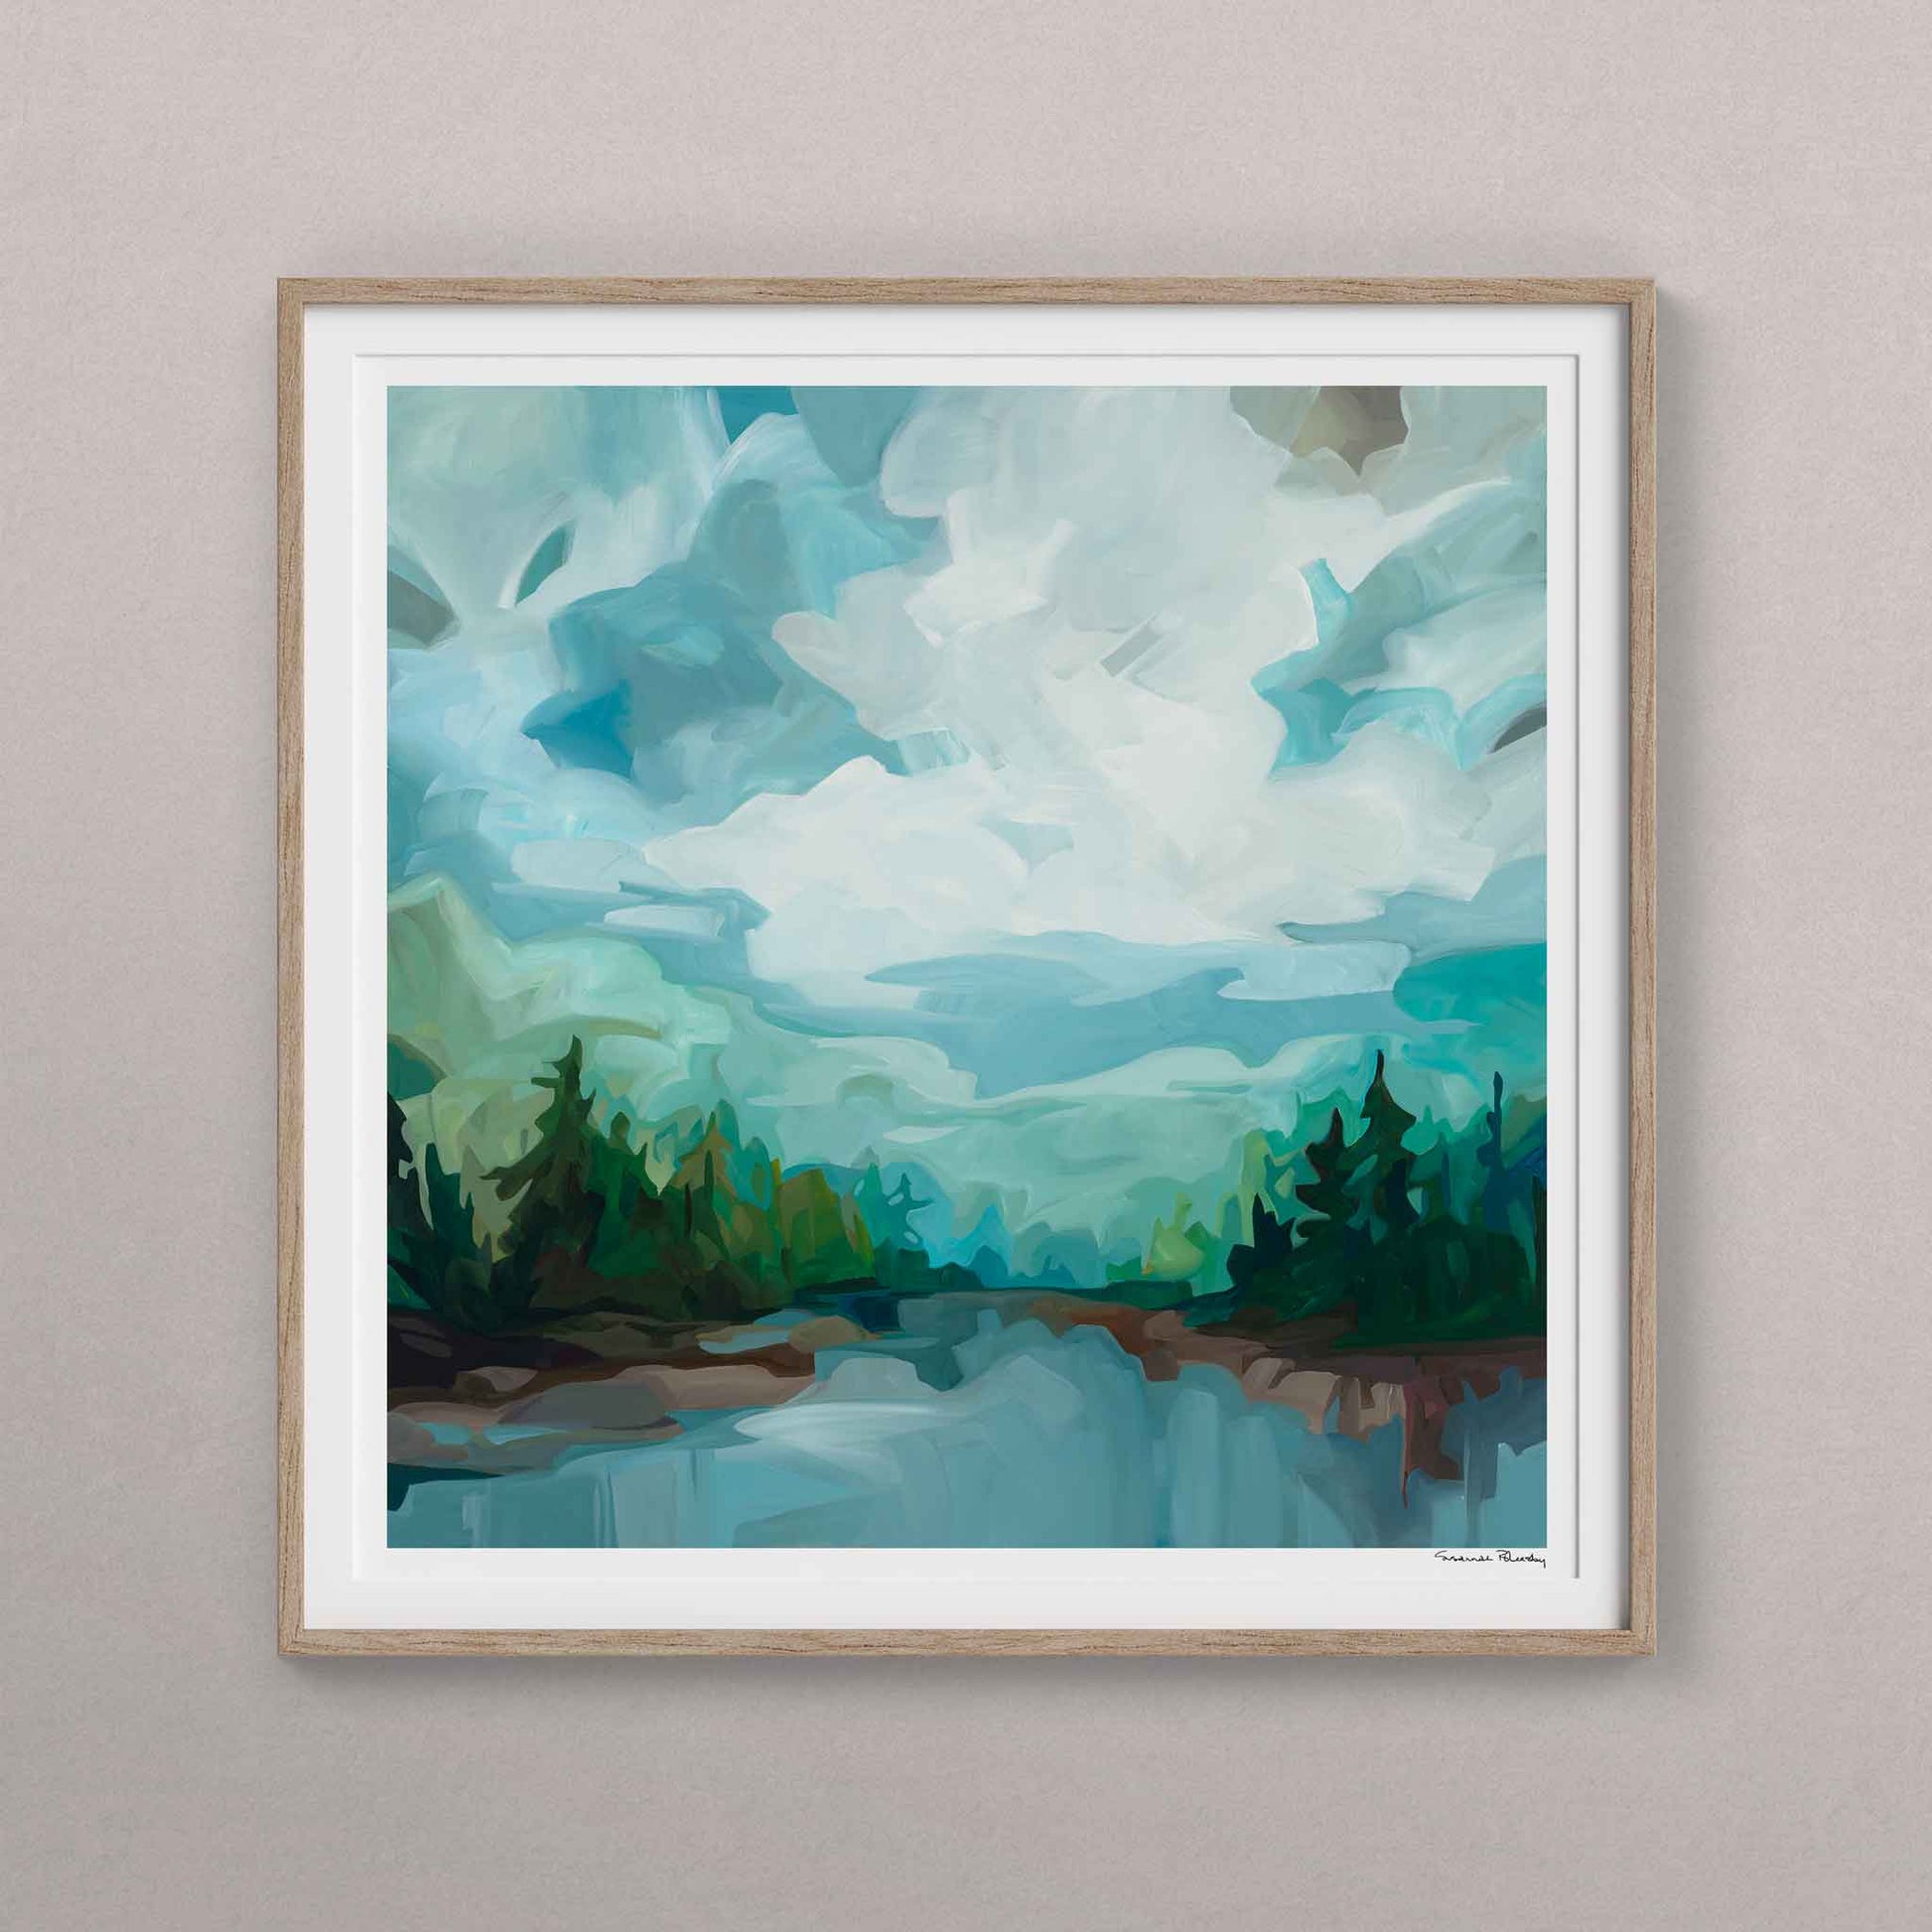 large square fine art print of lake scene painting under an abstract sky by Canadian abstract artist Susannah Bleasby